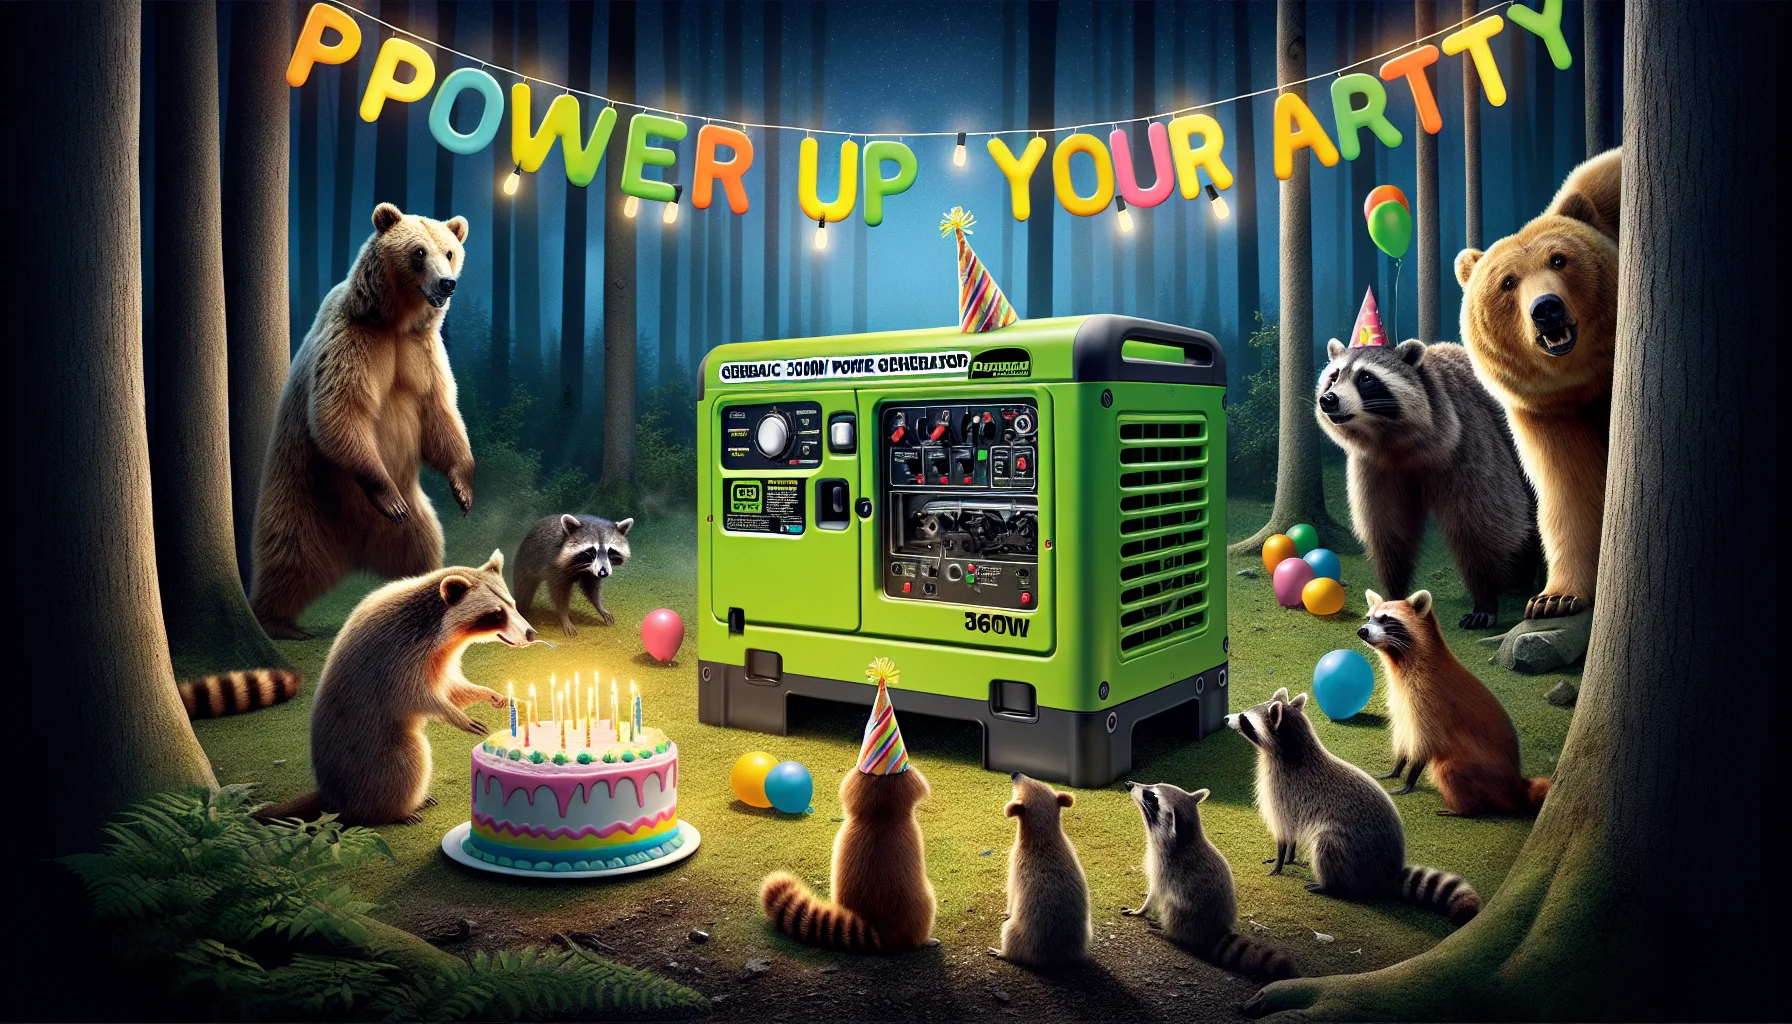 Produce an image of a generic lime-green and gray 3600W power generator, in a humorous situation. In this scenario, the generator is in the centre of a birthday party in the forest at night. Forest animals, such as a bear, raccoons, and owls, are visually curiously inspecting it, awestruck by the glowing lights powered by the generator illuminating the forest. Streamers and balloons adorn the generator as though it's the guest of honor. The message 'Power up your party' is humorously displayed in vibrant, cheerful colors, signifying the enticing element of generating electricity.